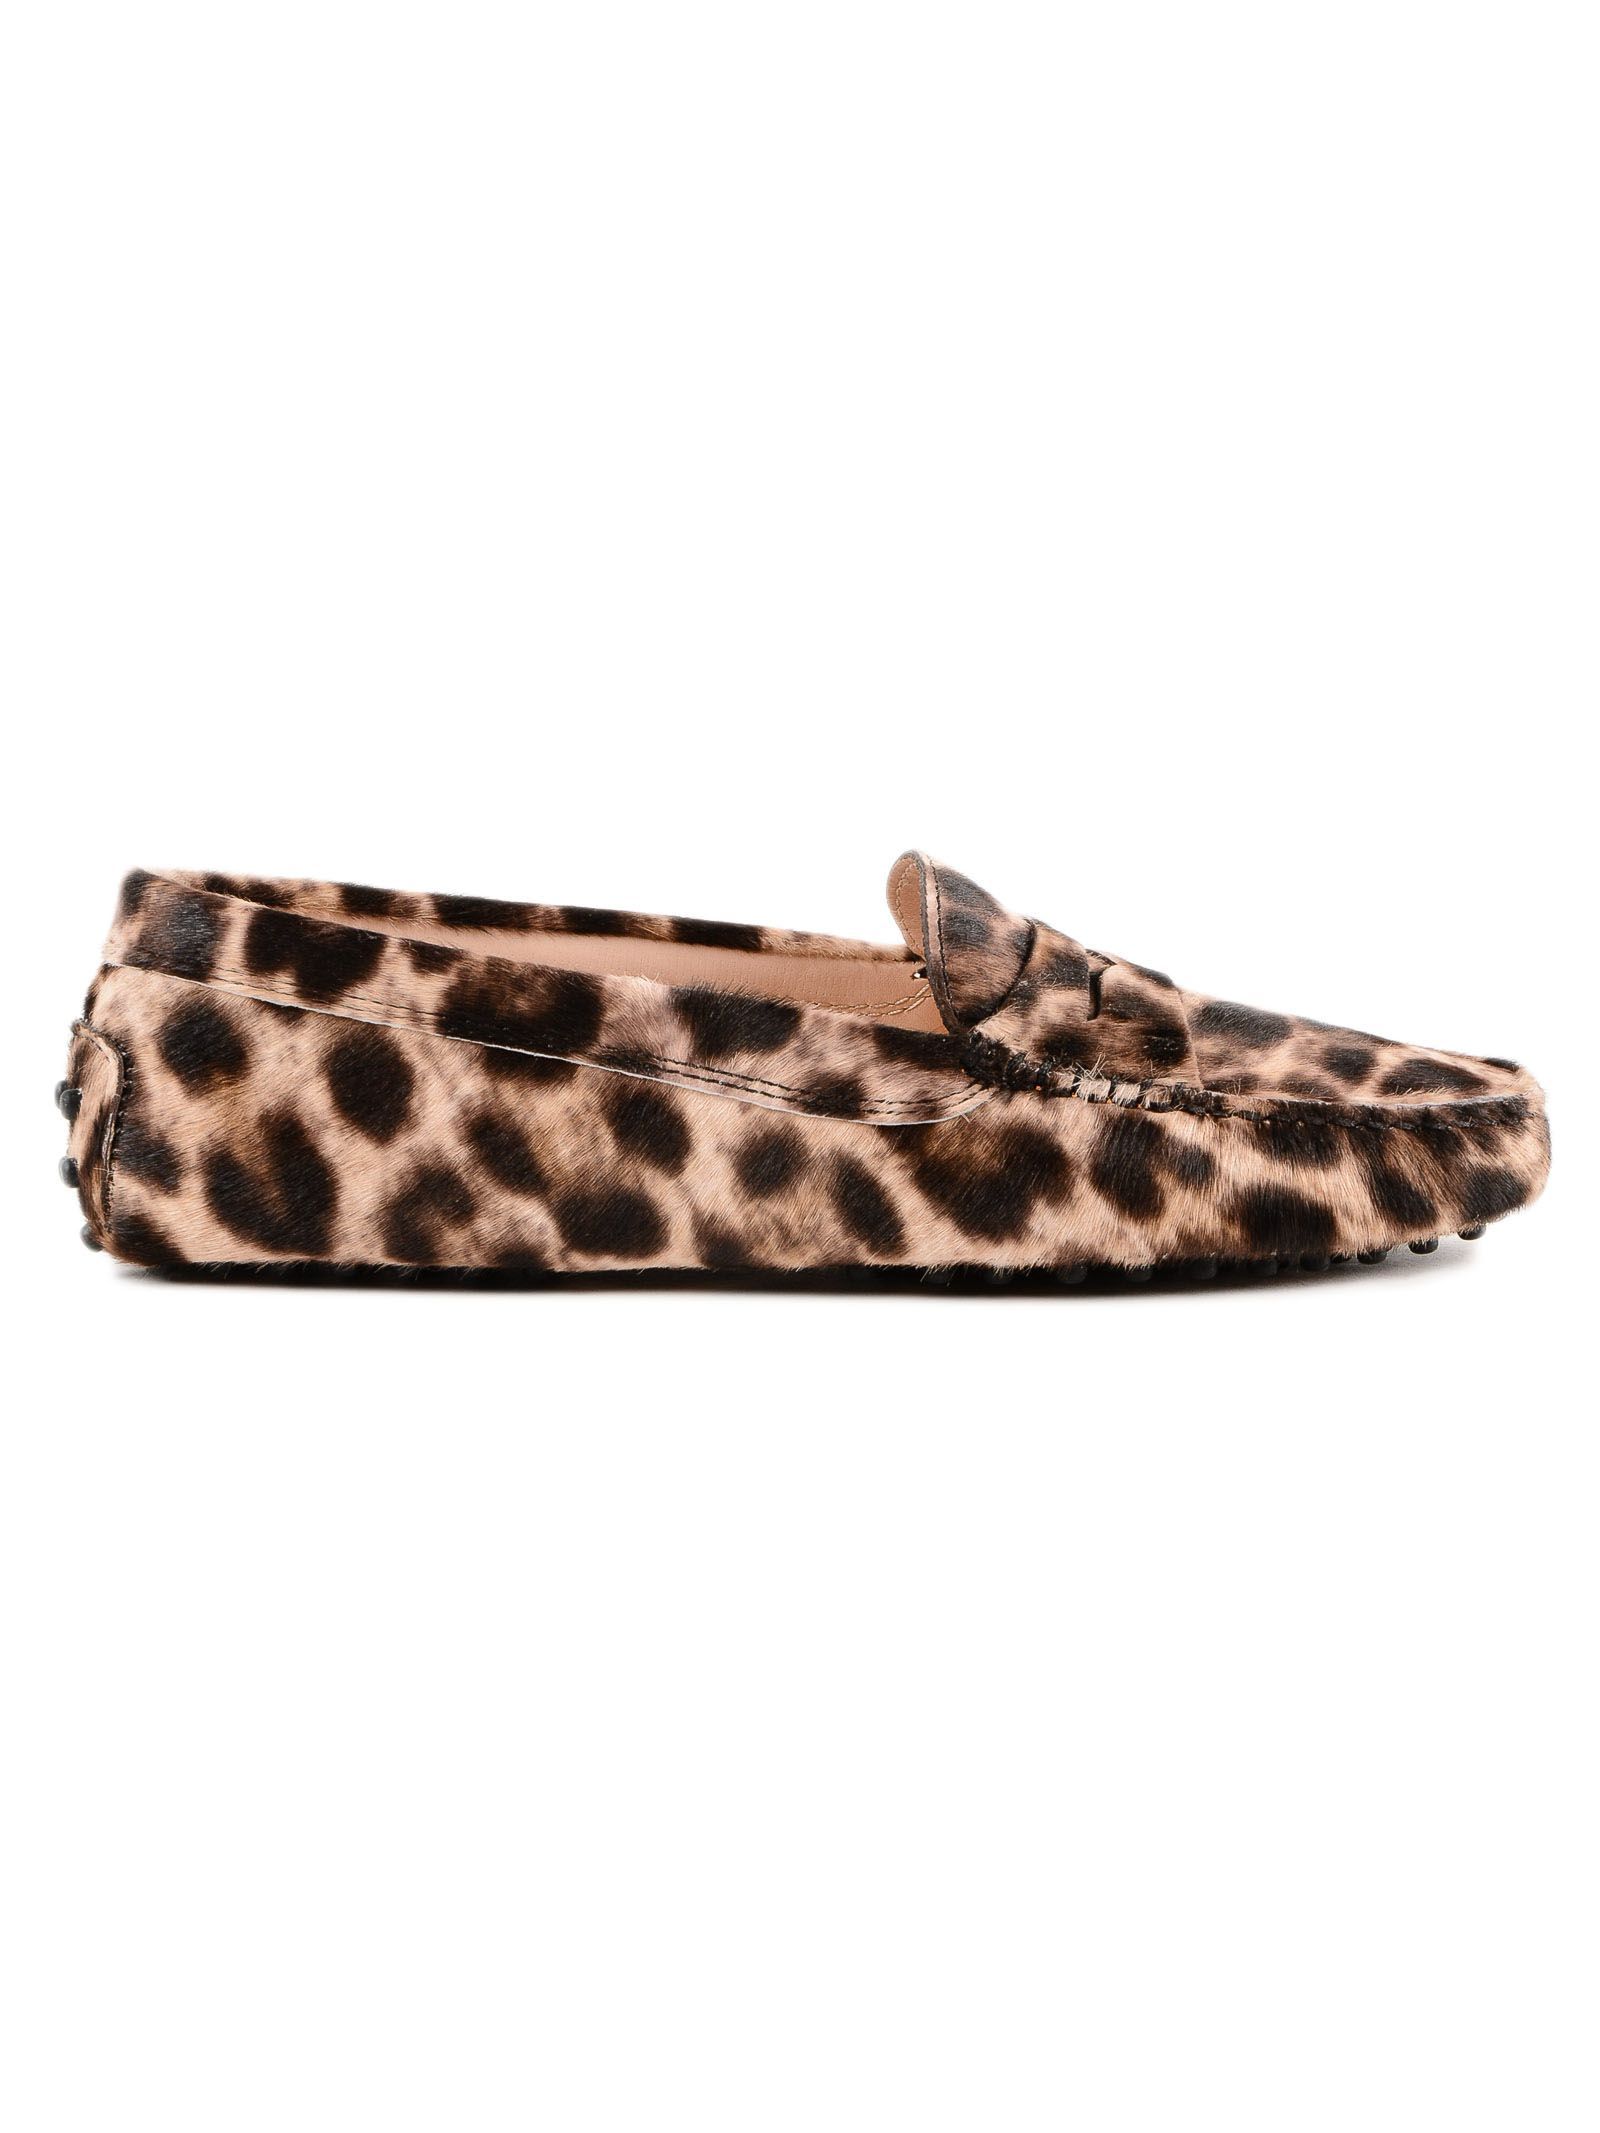 Tod's Leopard Loafers | Italist.com US